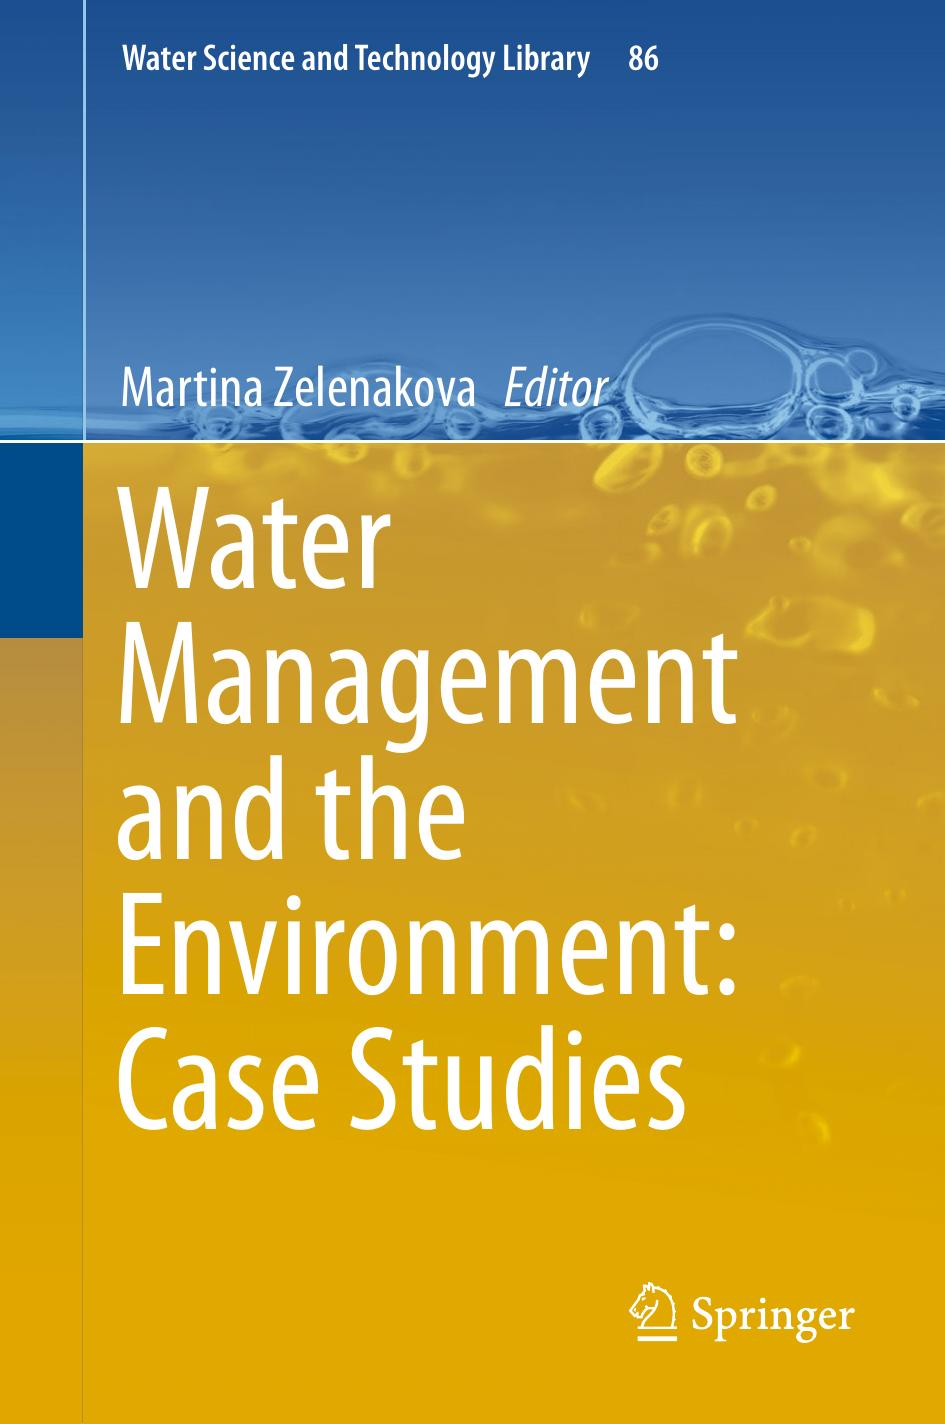 Water Management and the Environment: Case Studies by Martina Zelenakova